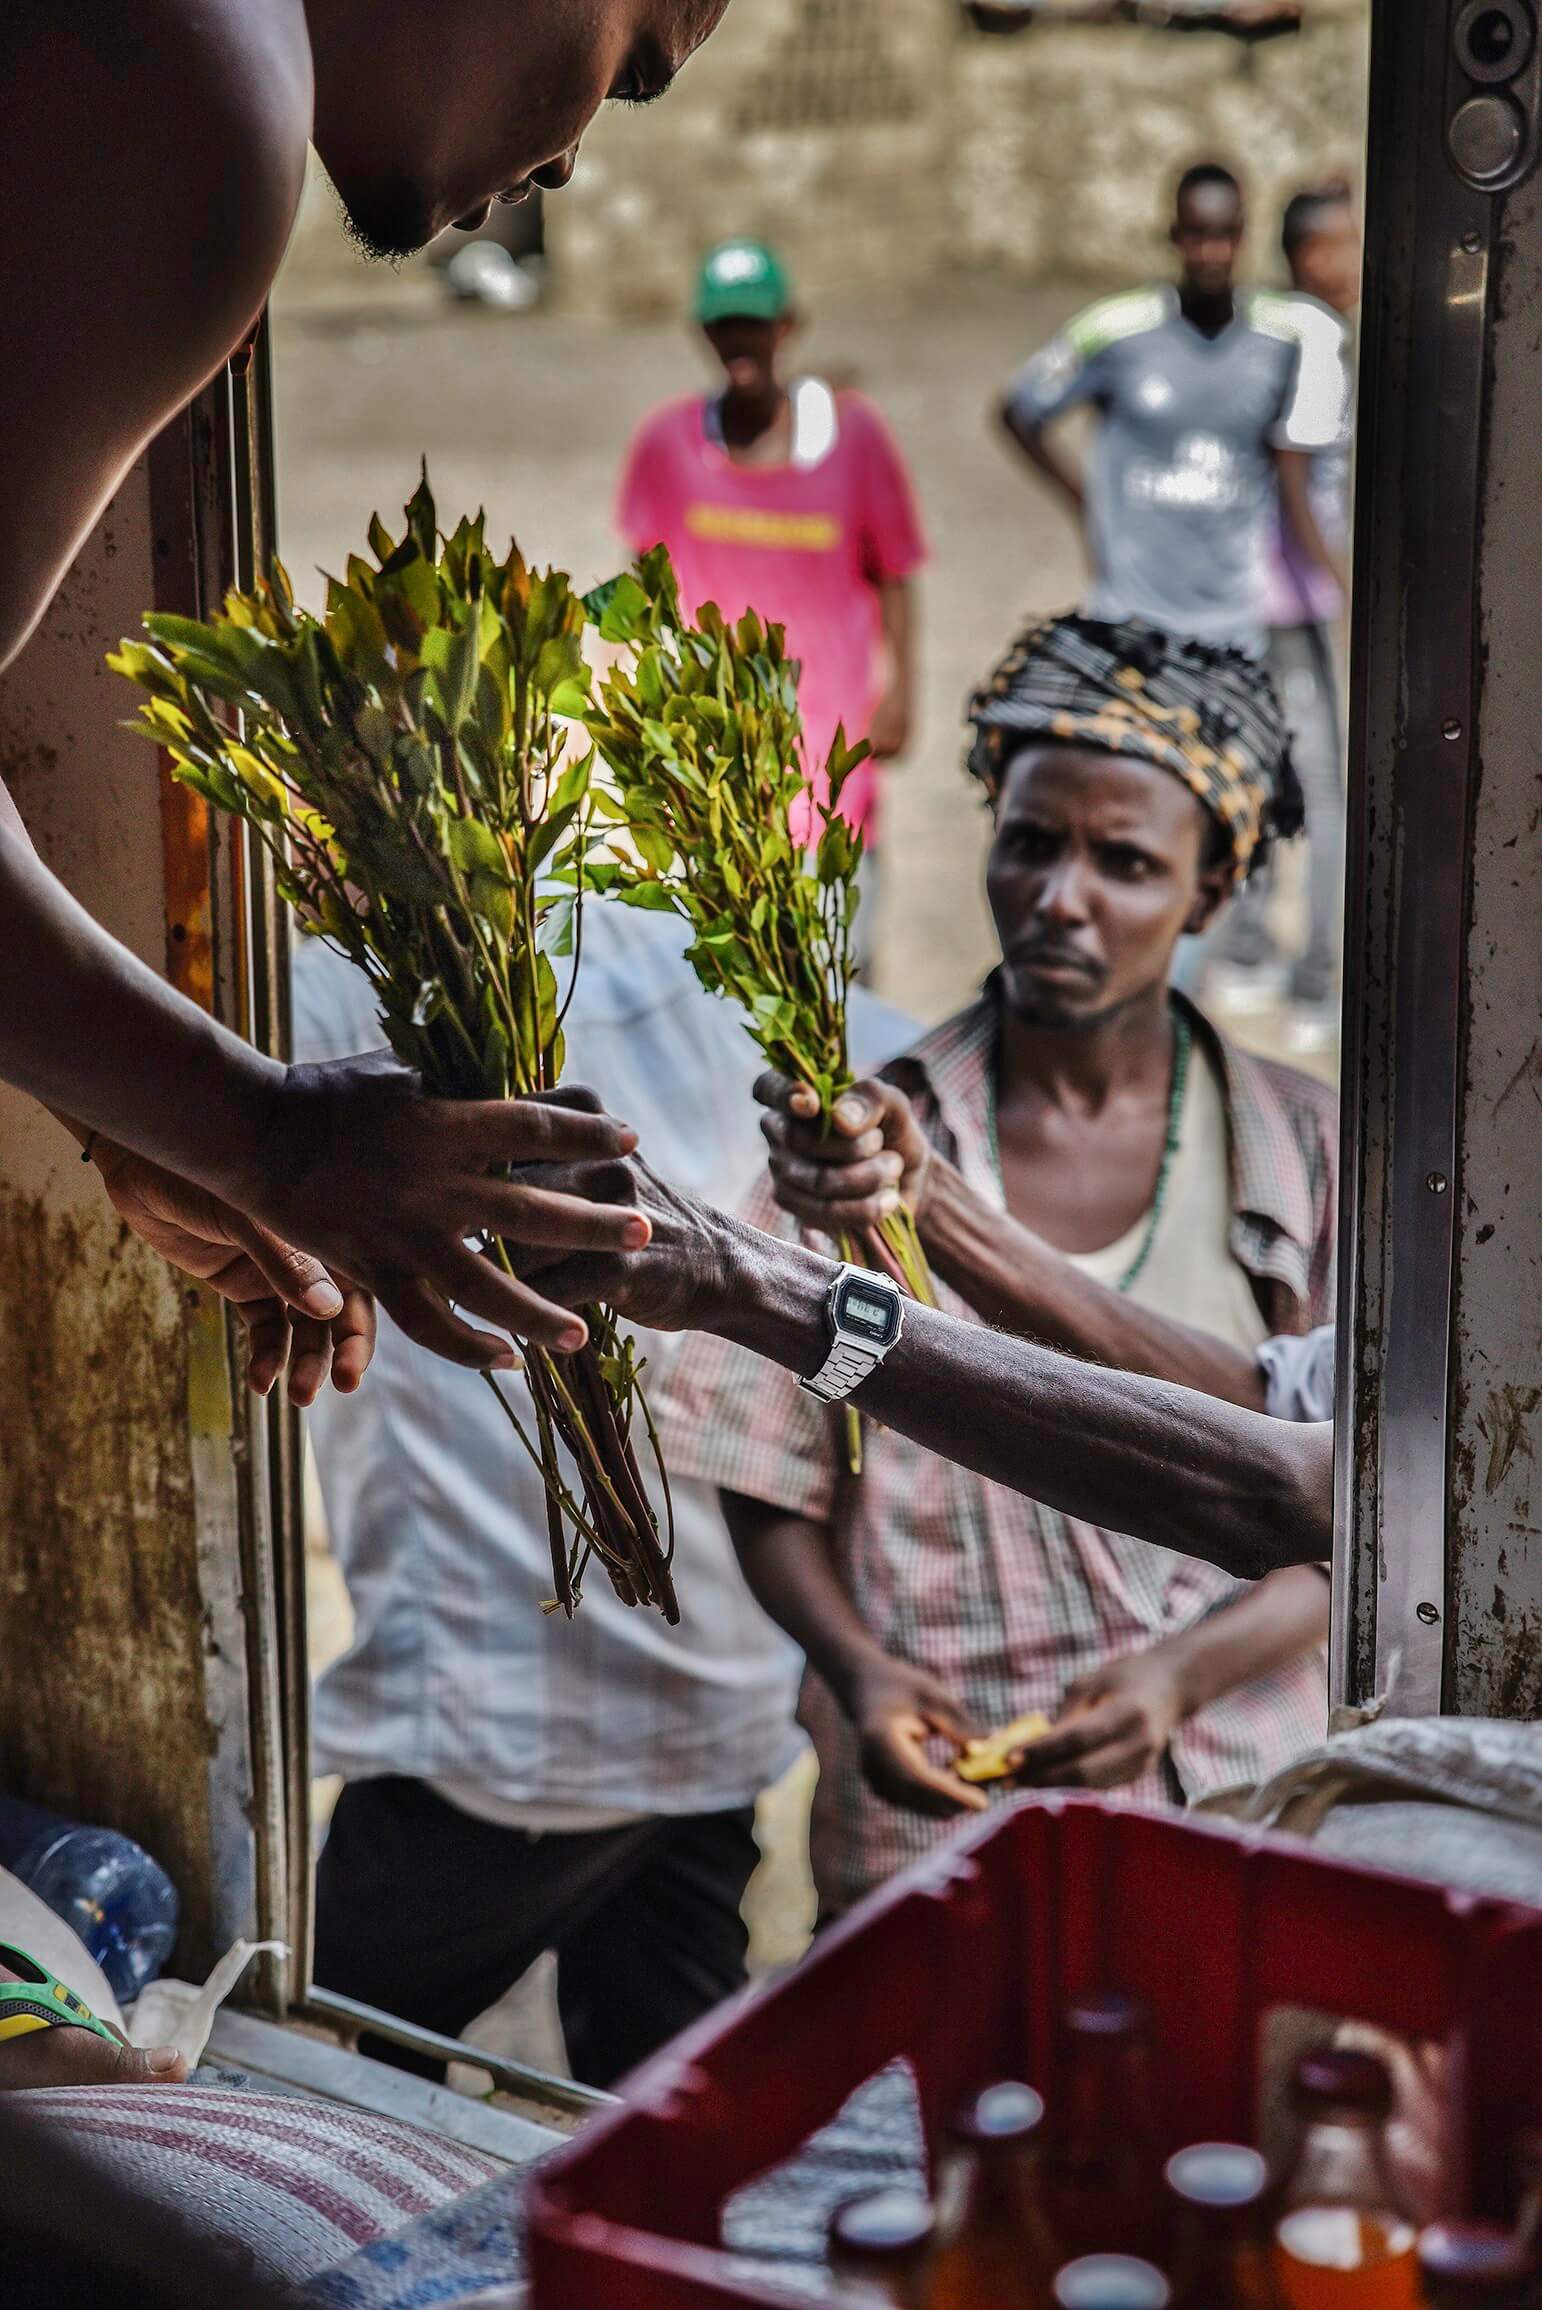 Men sell and buy khat during a strop in a village